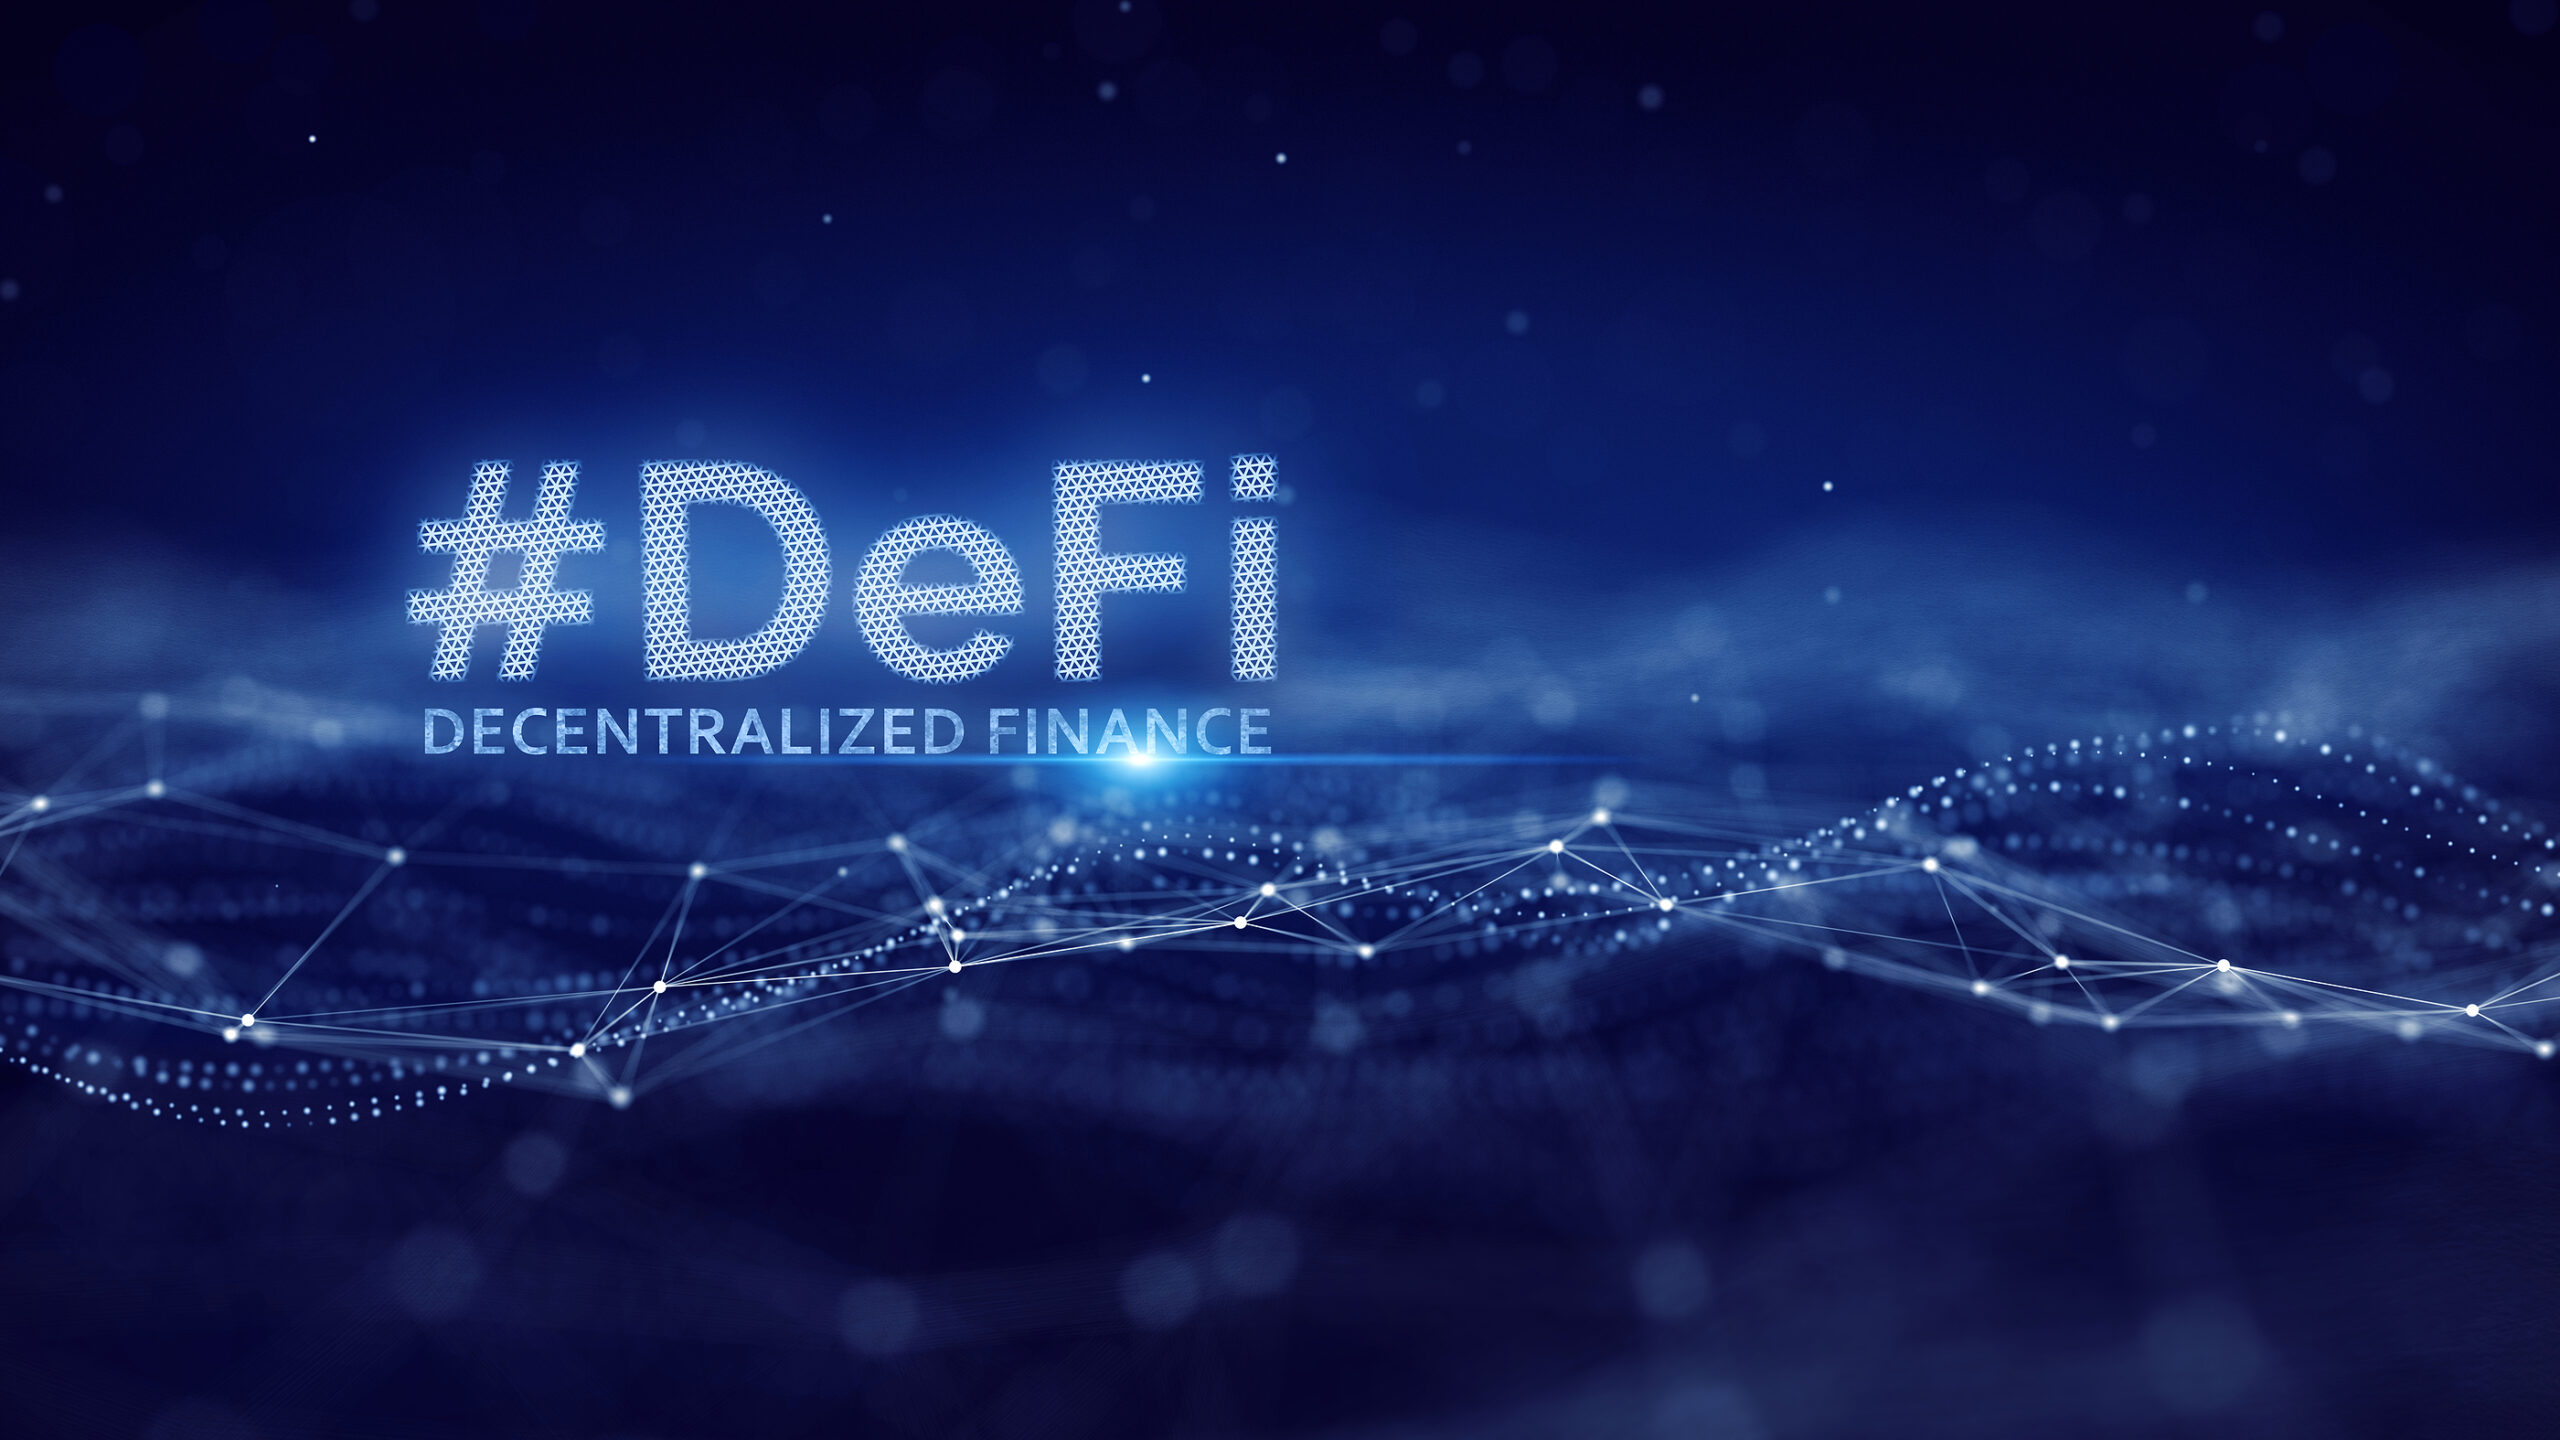 Analyst says DeFi and stablecoins held up well as crypto markets imploded